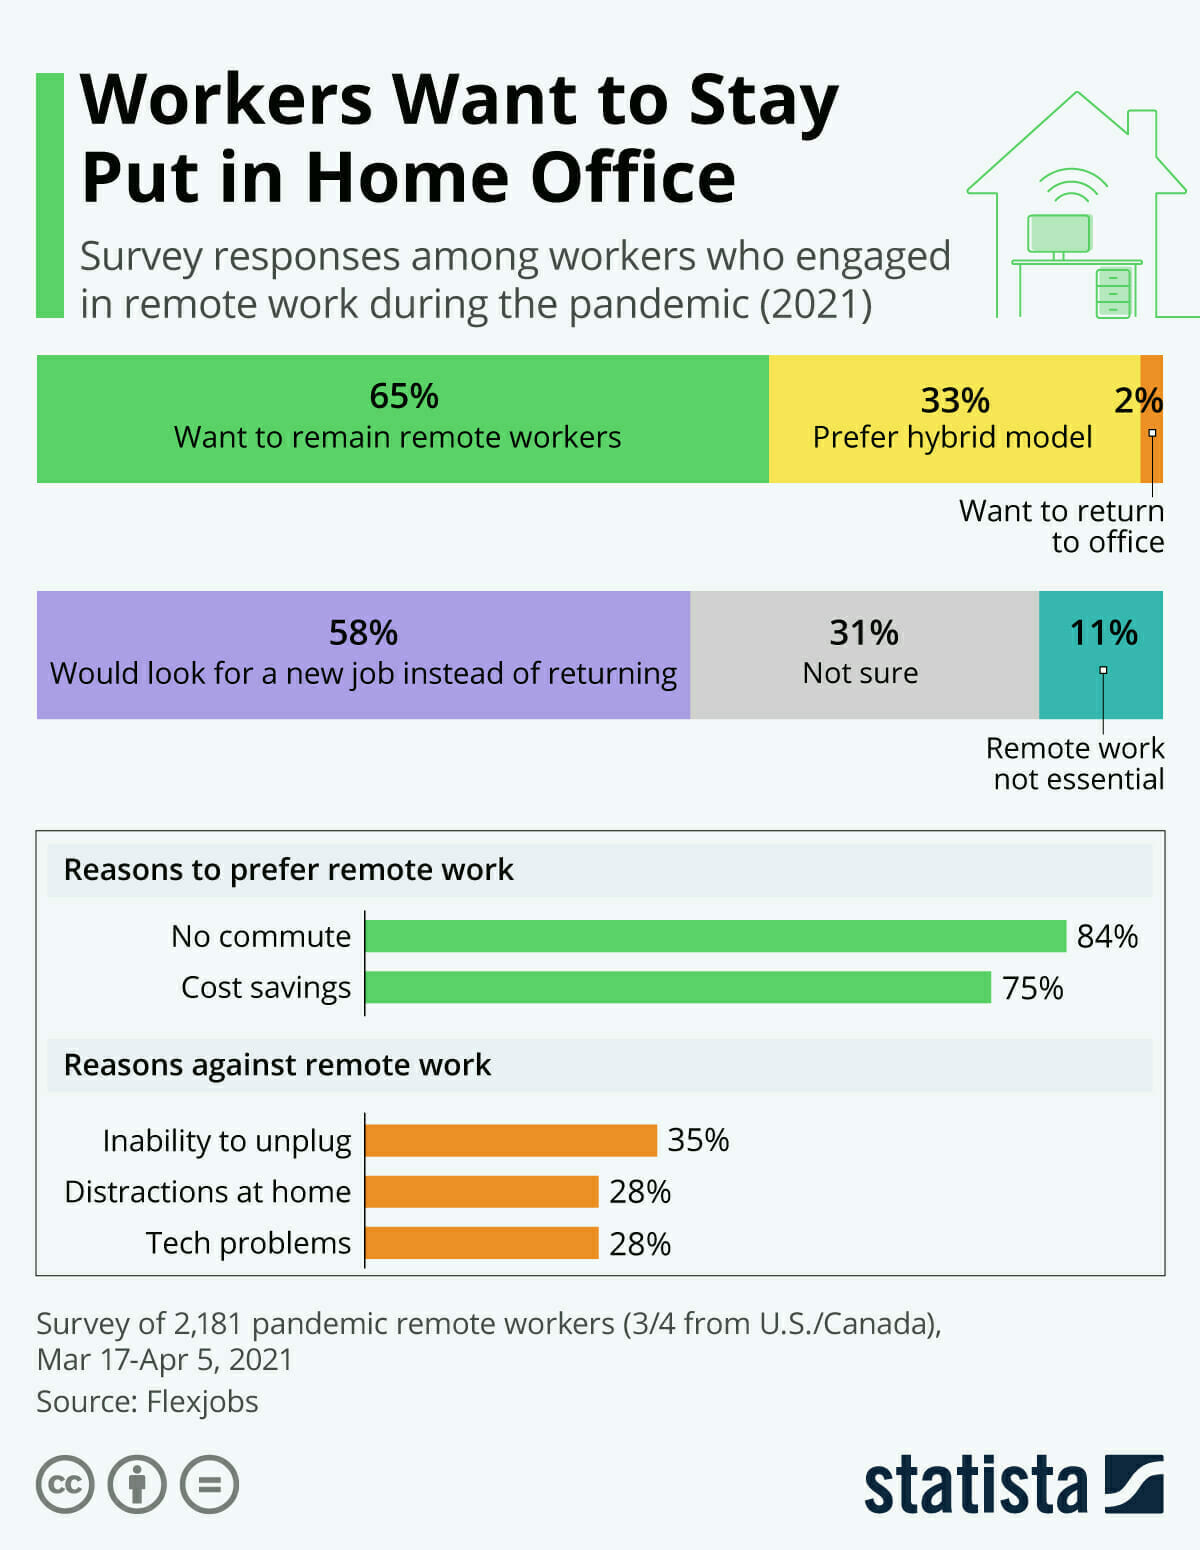 Workers Want to Stay Put in Home Office